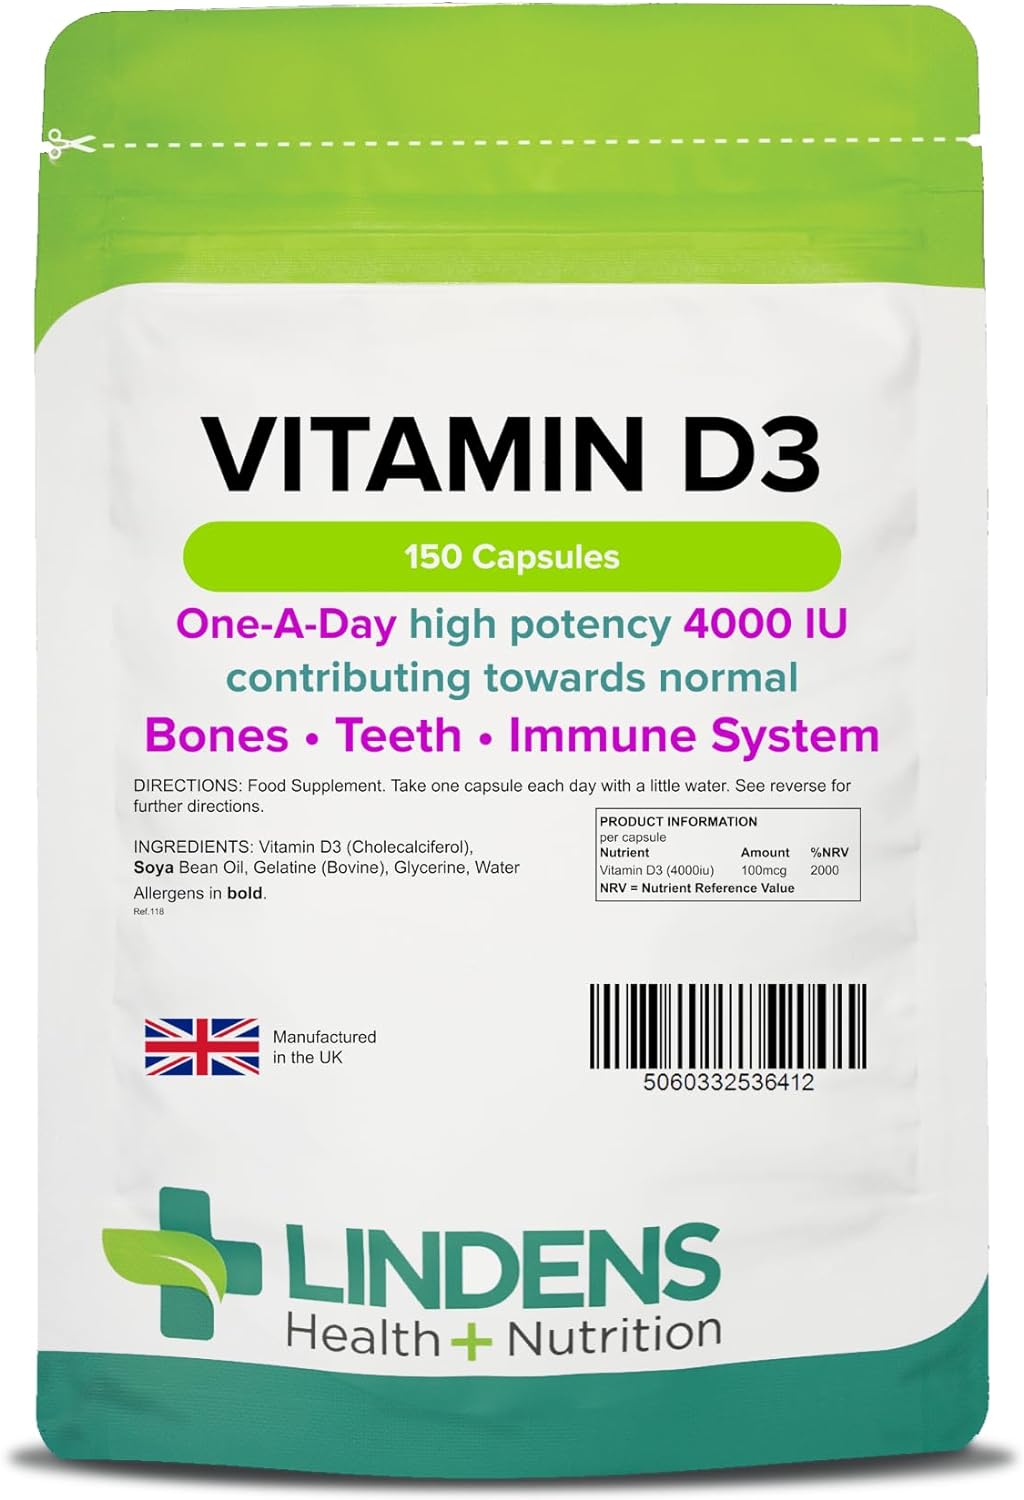 Lindens Vitamin D3 4000IU - 150 High Strength Capsules - Supports Healthy Immune System & Calcium Absorption - One-A-Day Capsule - 5 Month Supply - UK Manufacturer & Letterbox Friendly